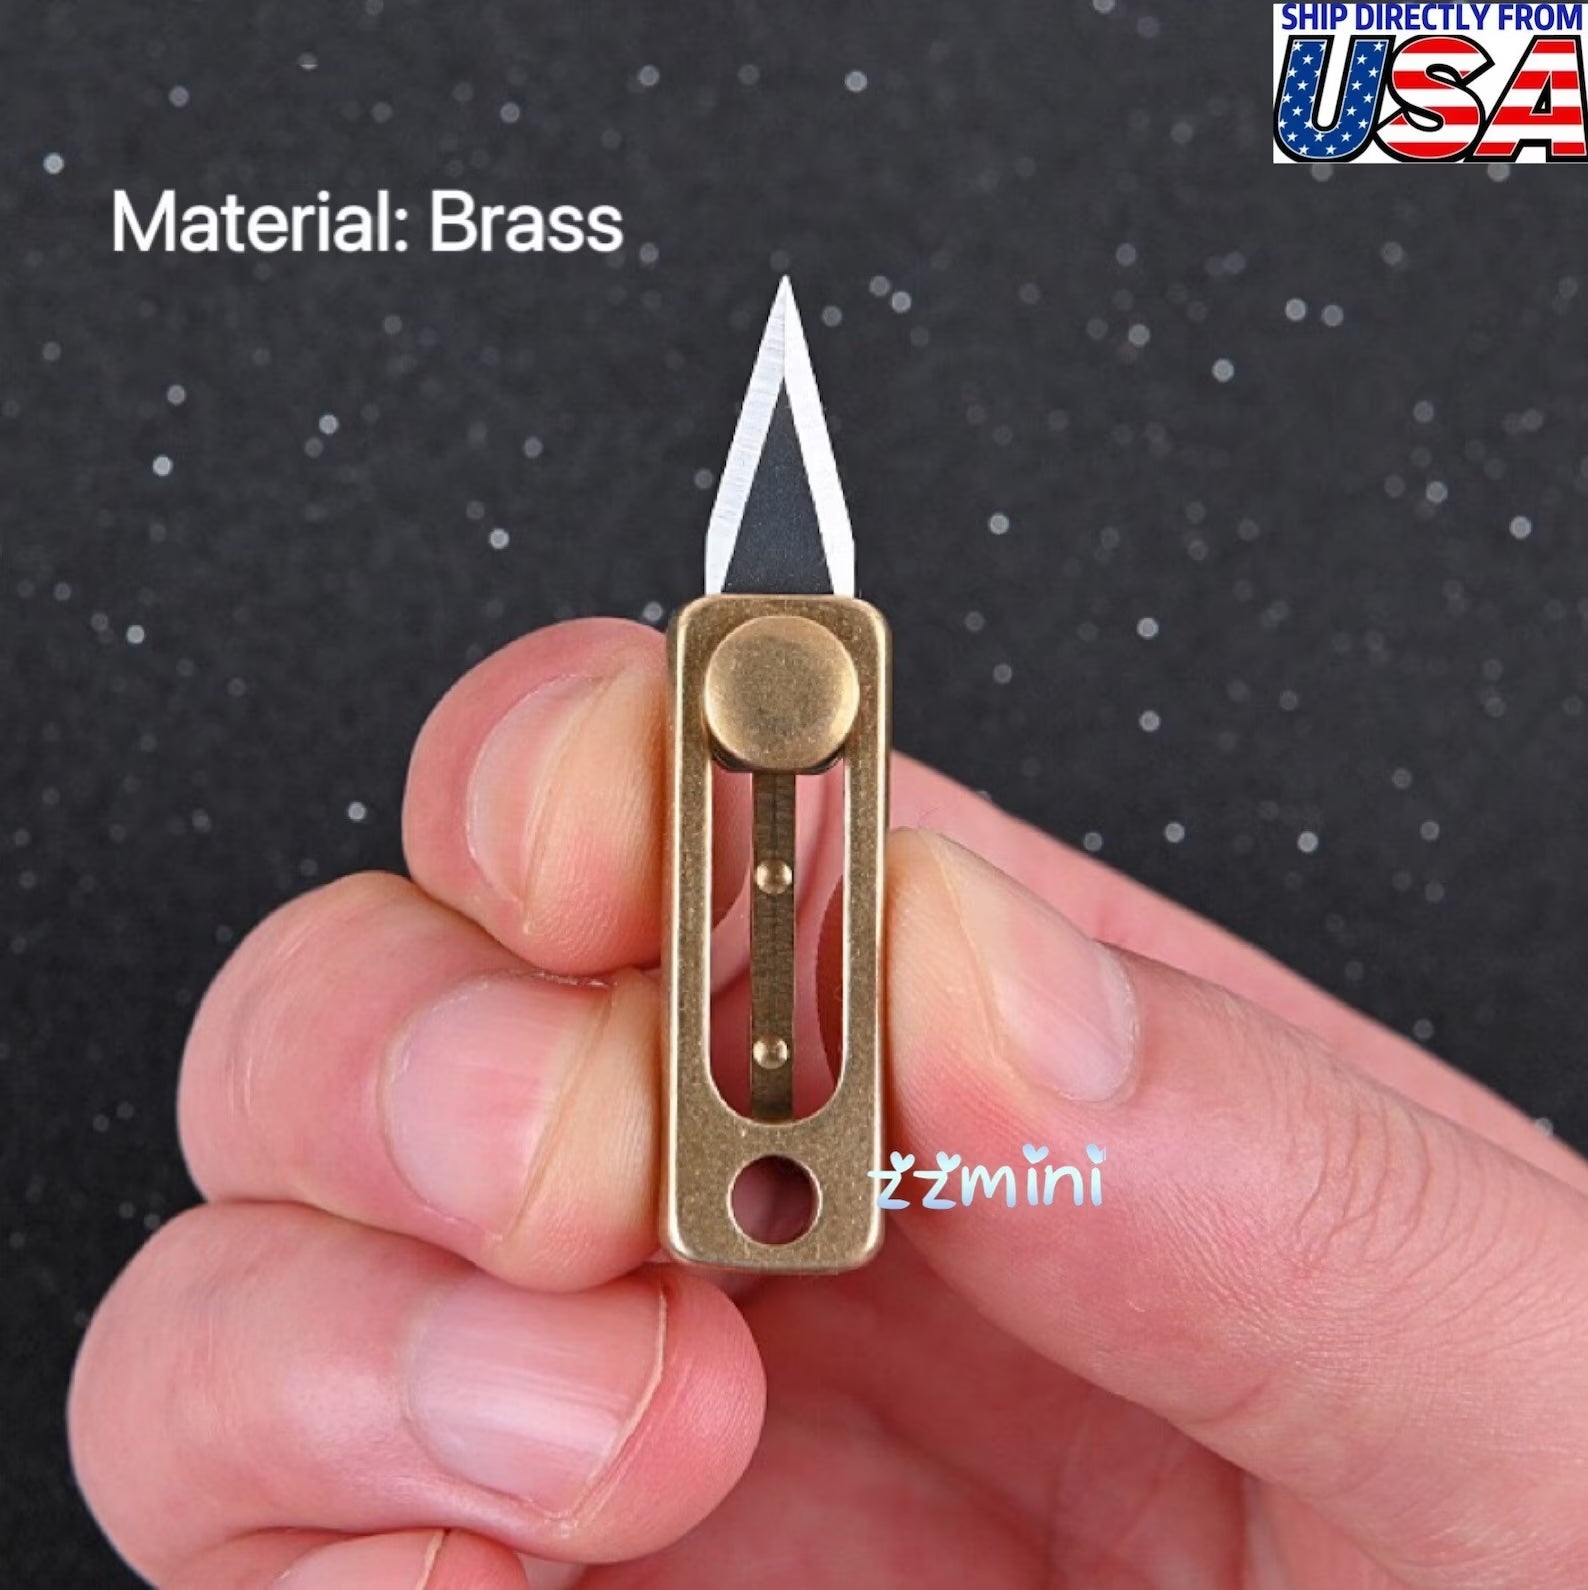 World Smallest Real Miniature Tiny Working Pocket Brass Chef Cooks Knife For Real Mini Cooking Gift